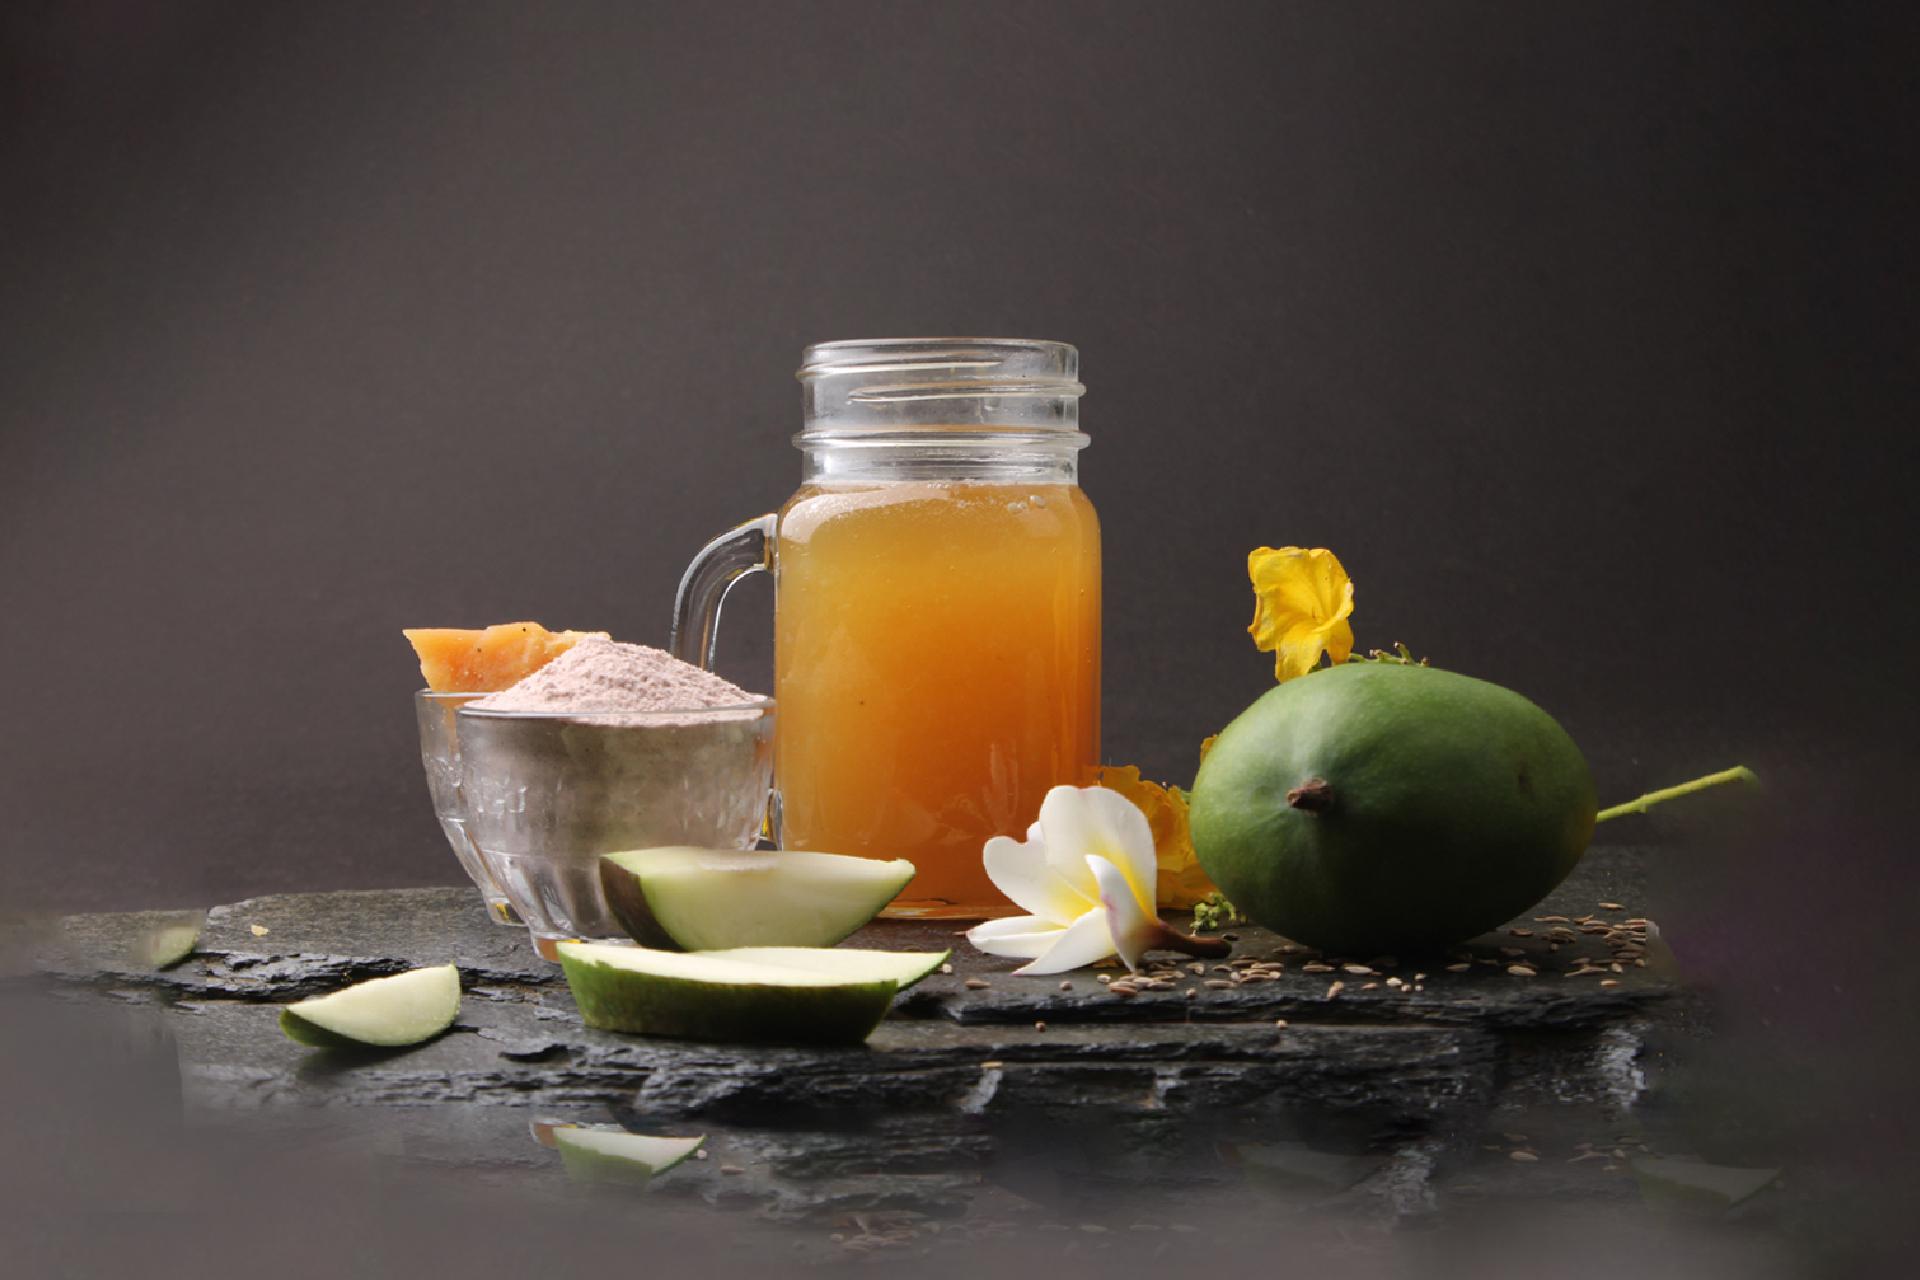 Aam Panna: 5 Top Things to Know About This Delicious Delight